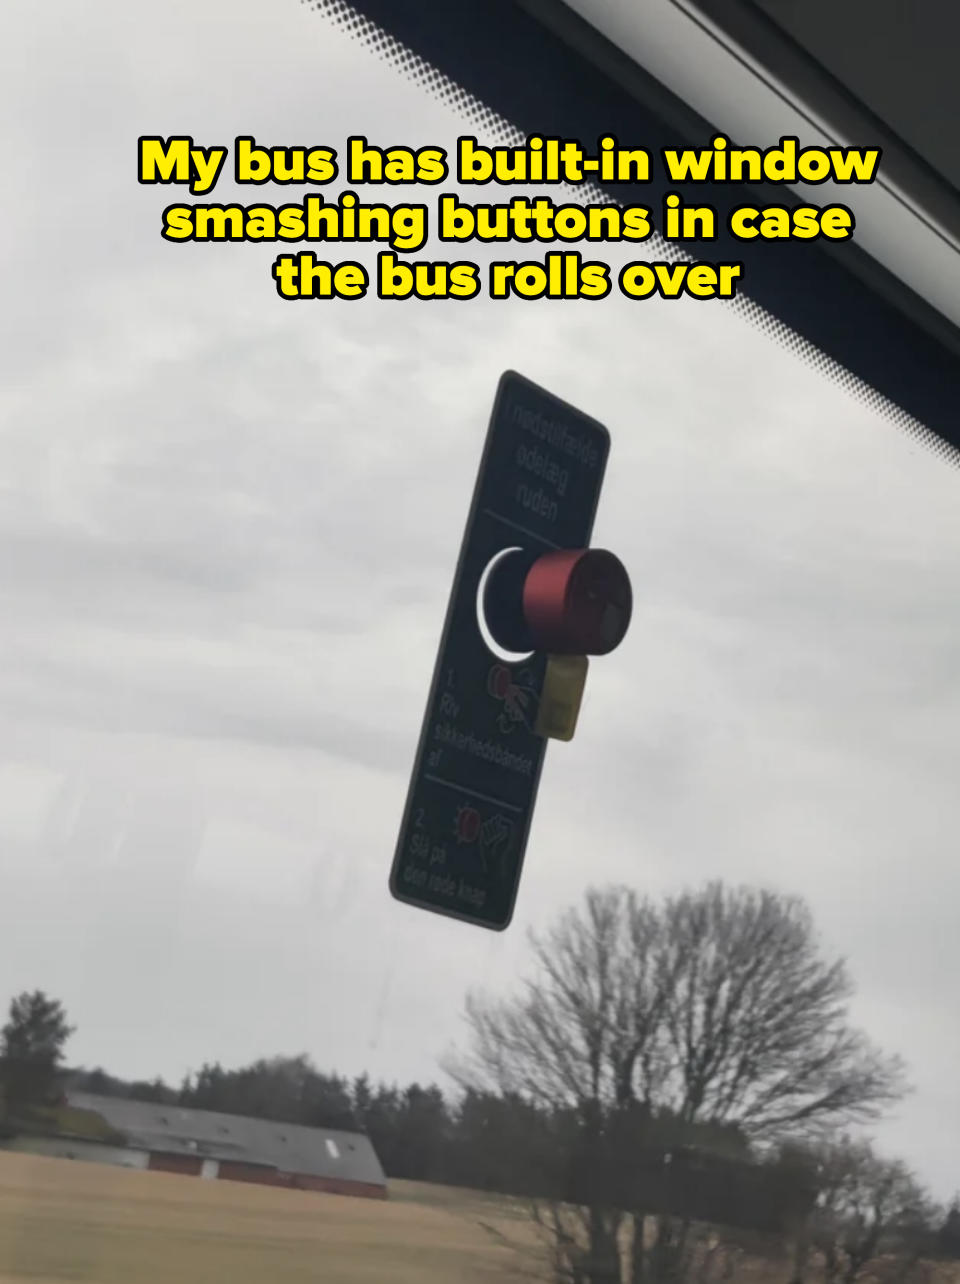 Bus glass button in the middle of the window